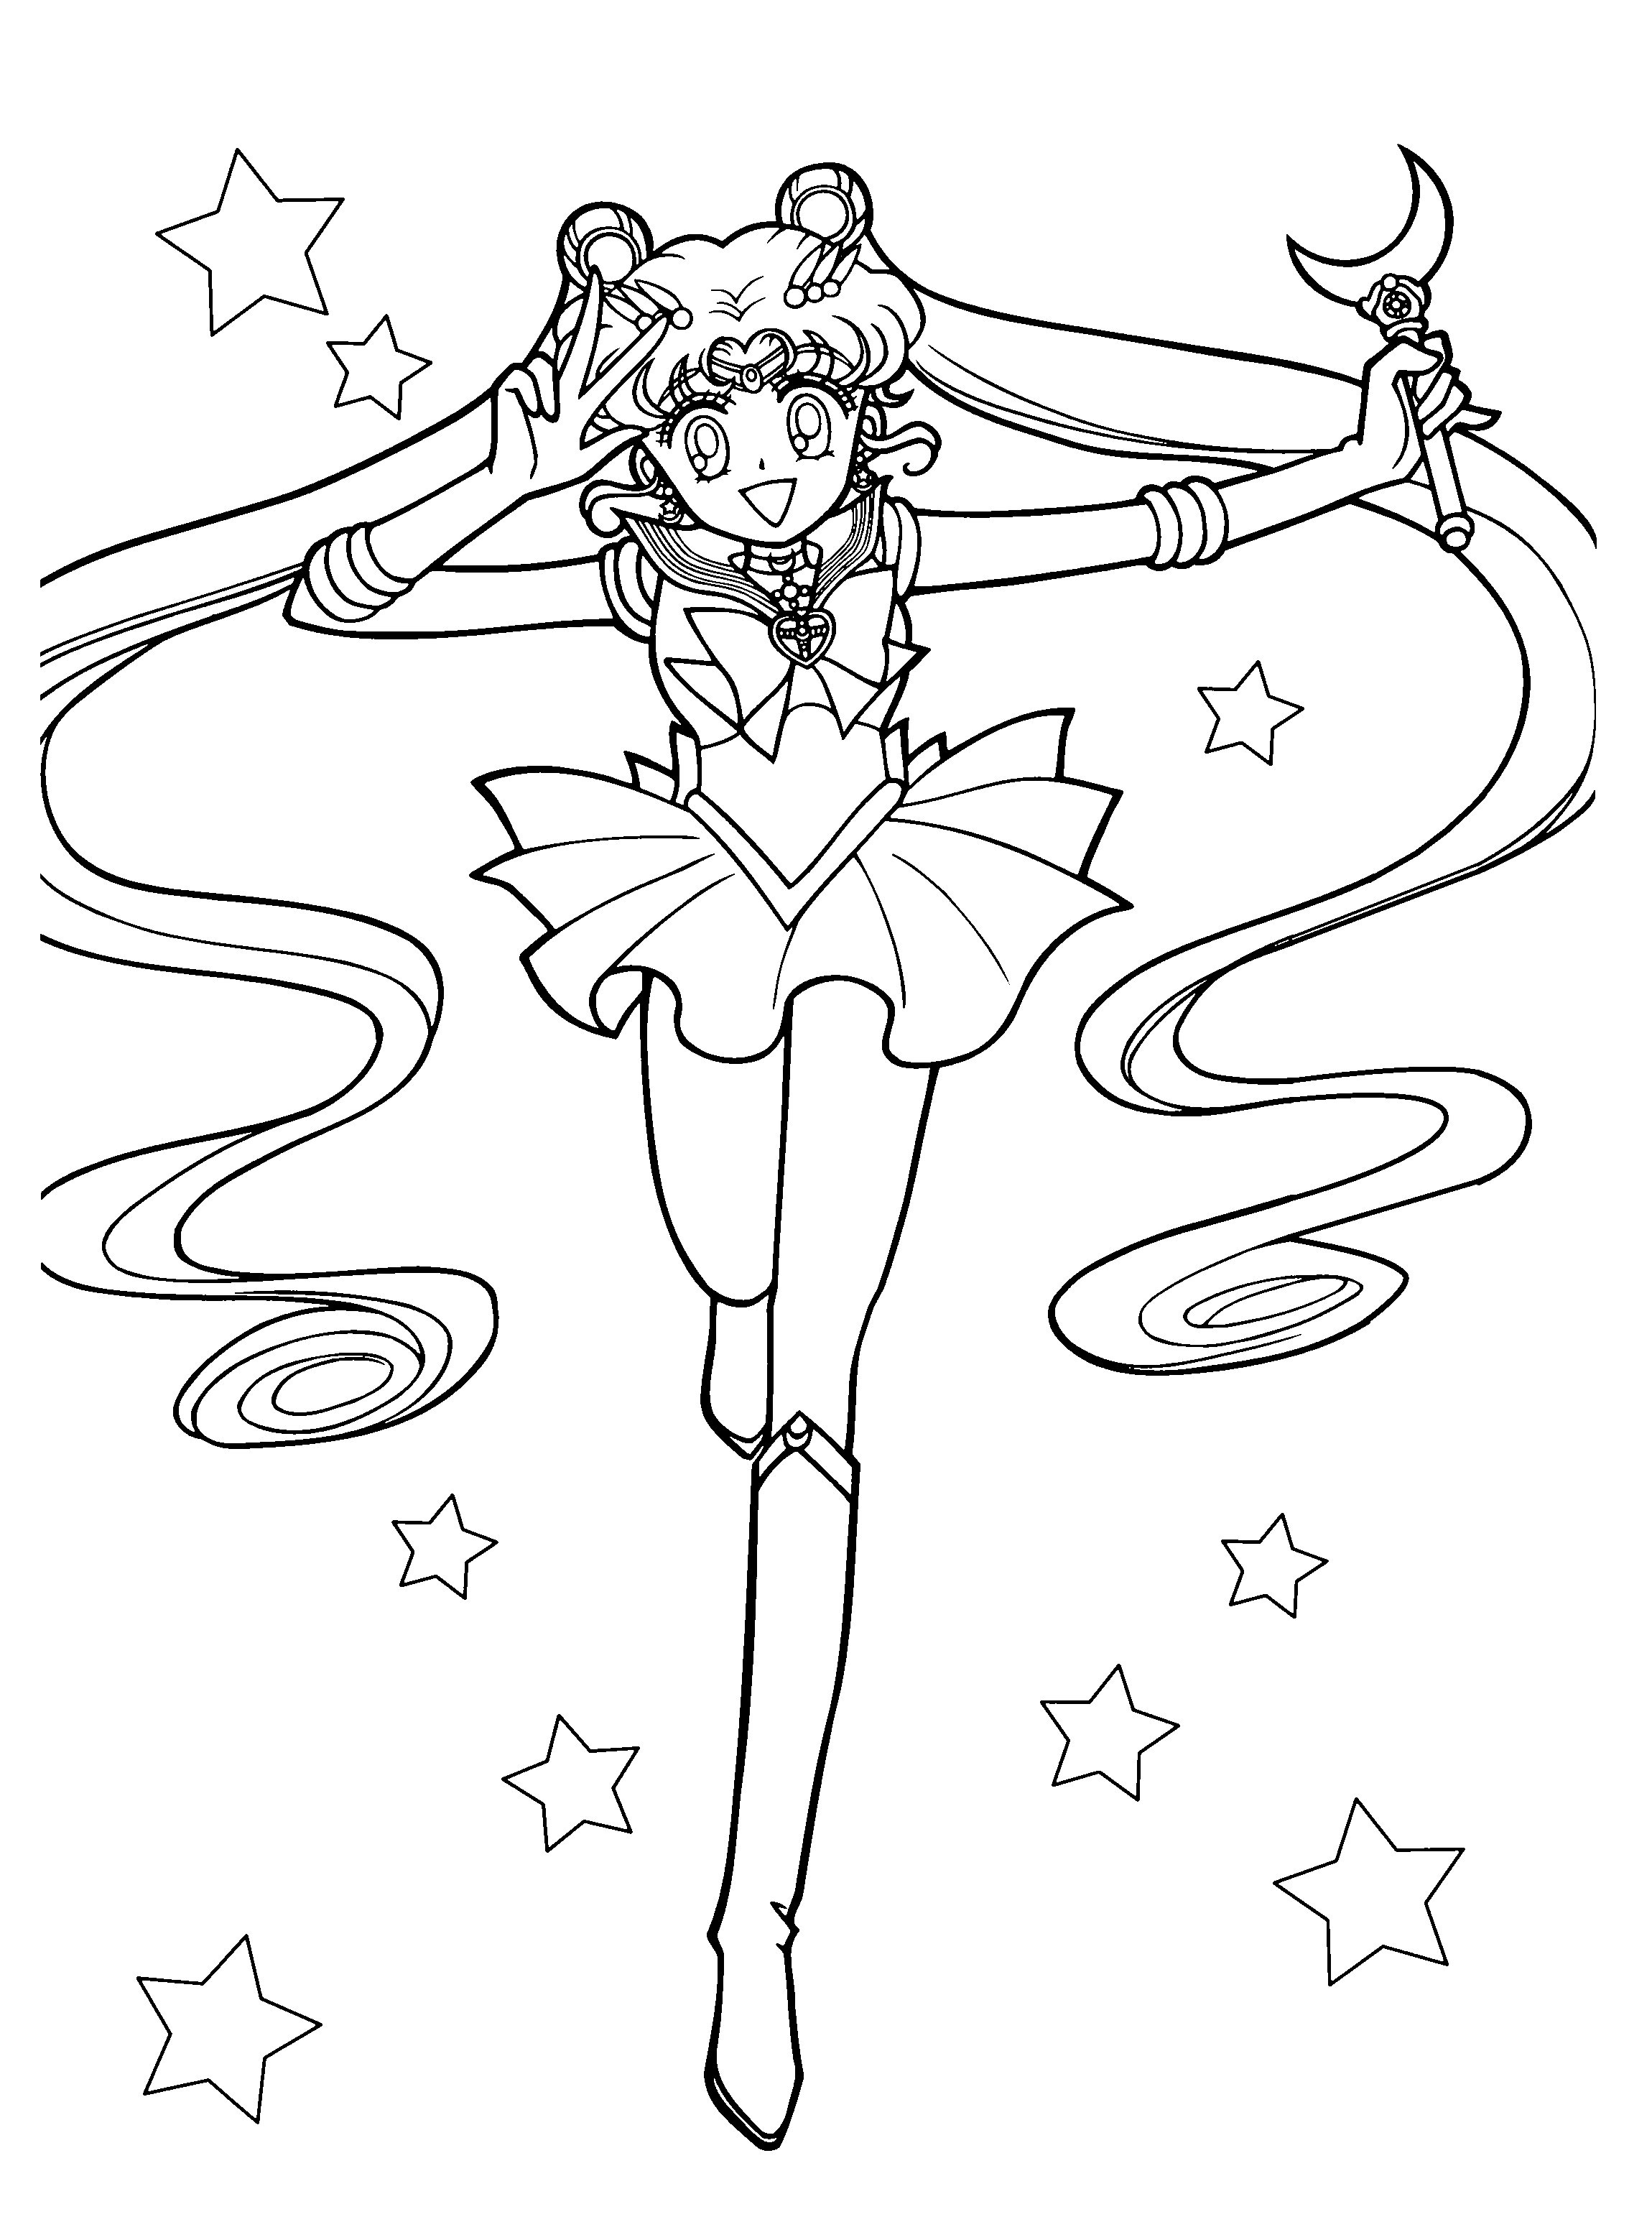 Coloring Page - Sailormoon coloring pages 28